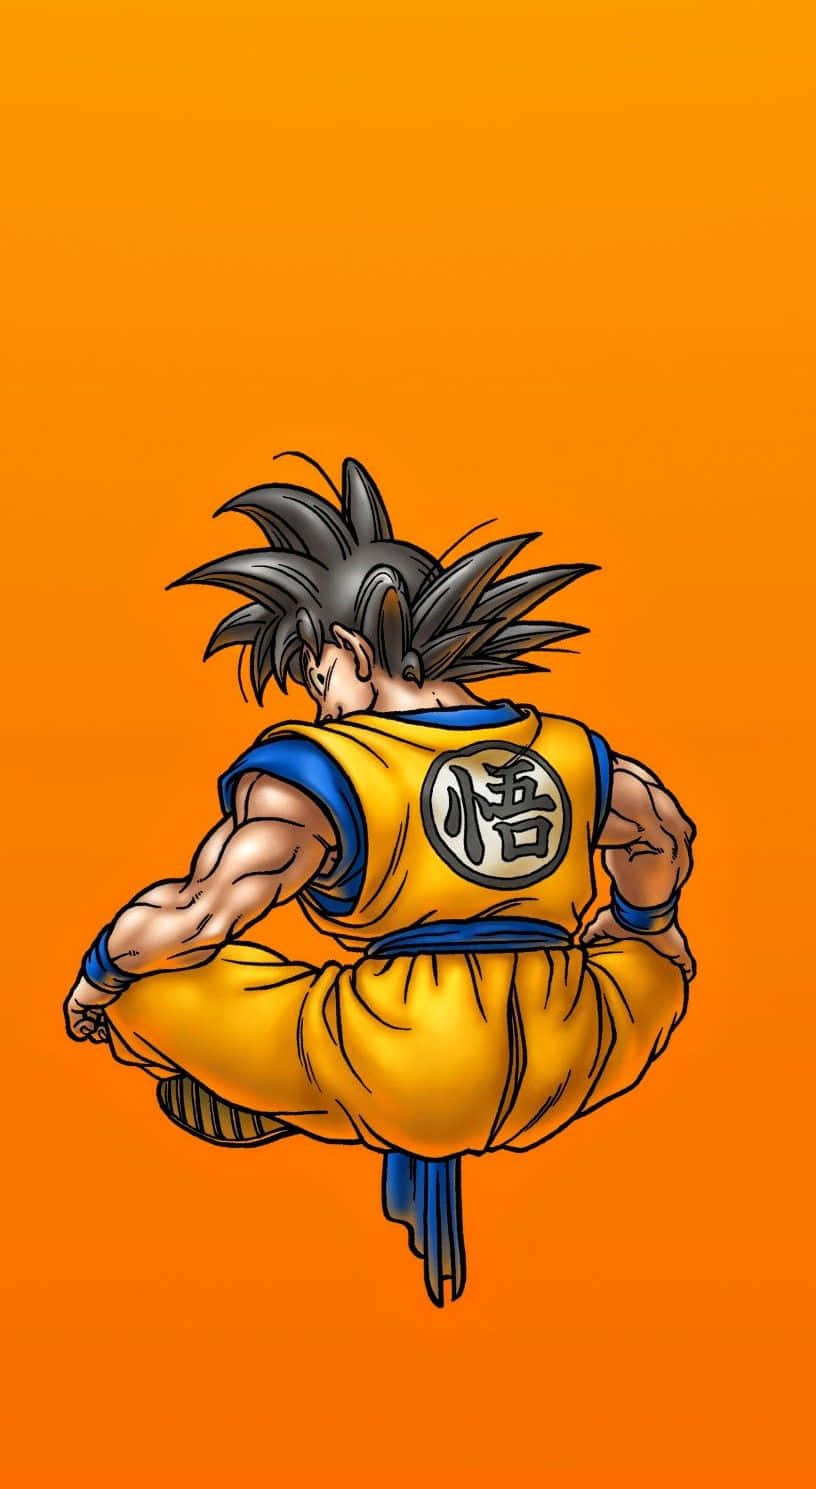 Get Ready for Non-Stop Laughs with Funny Goku! Wallpaper